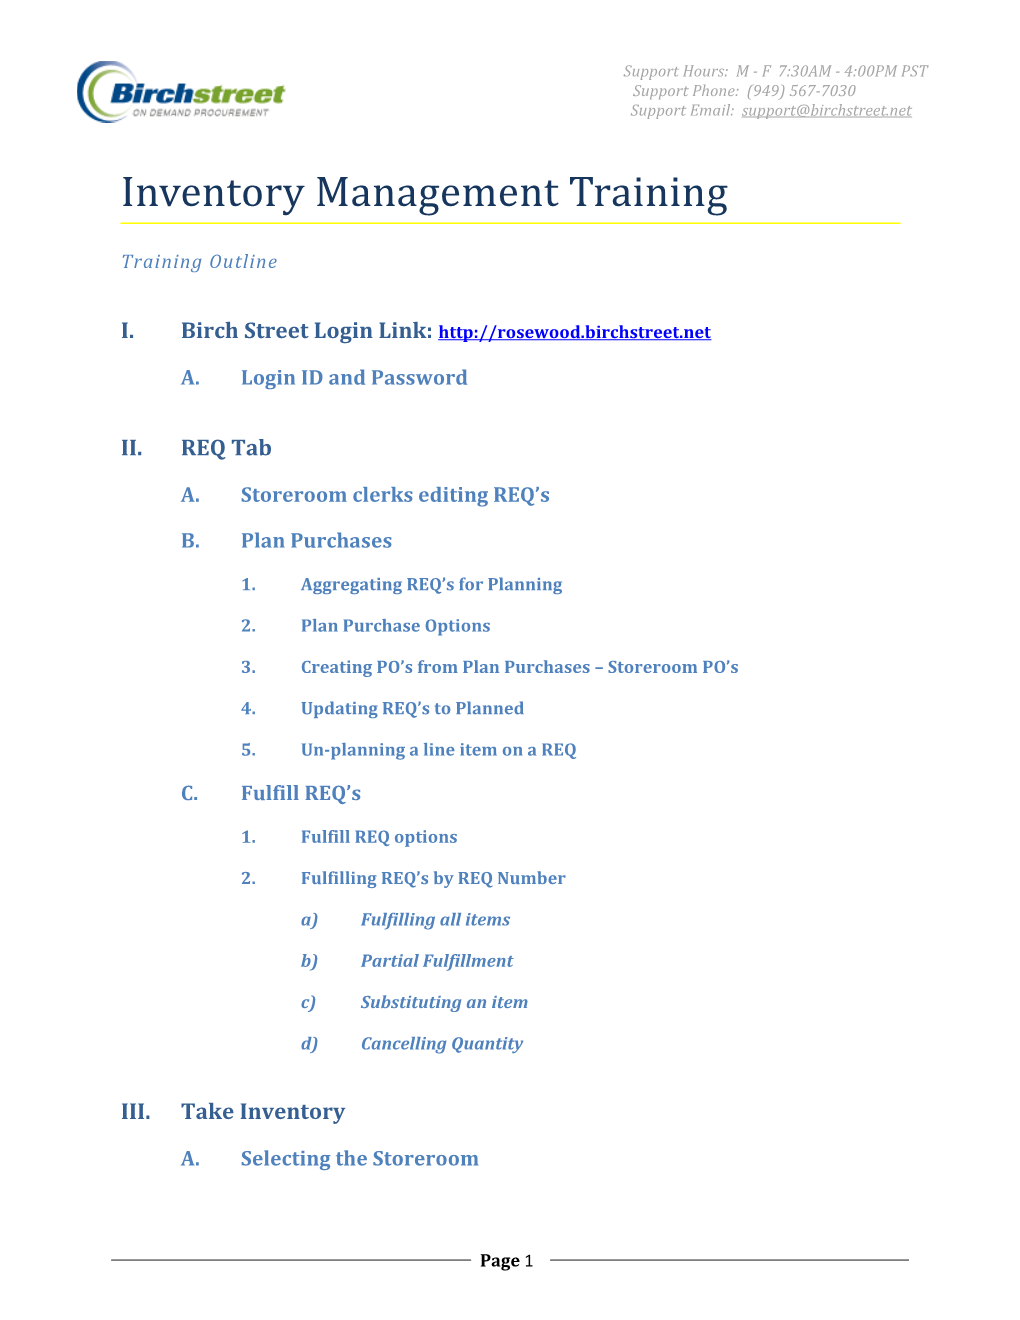 Inventory Training Outline